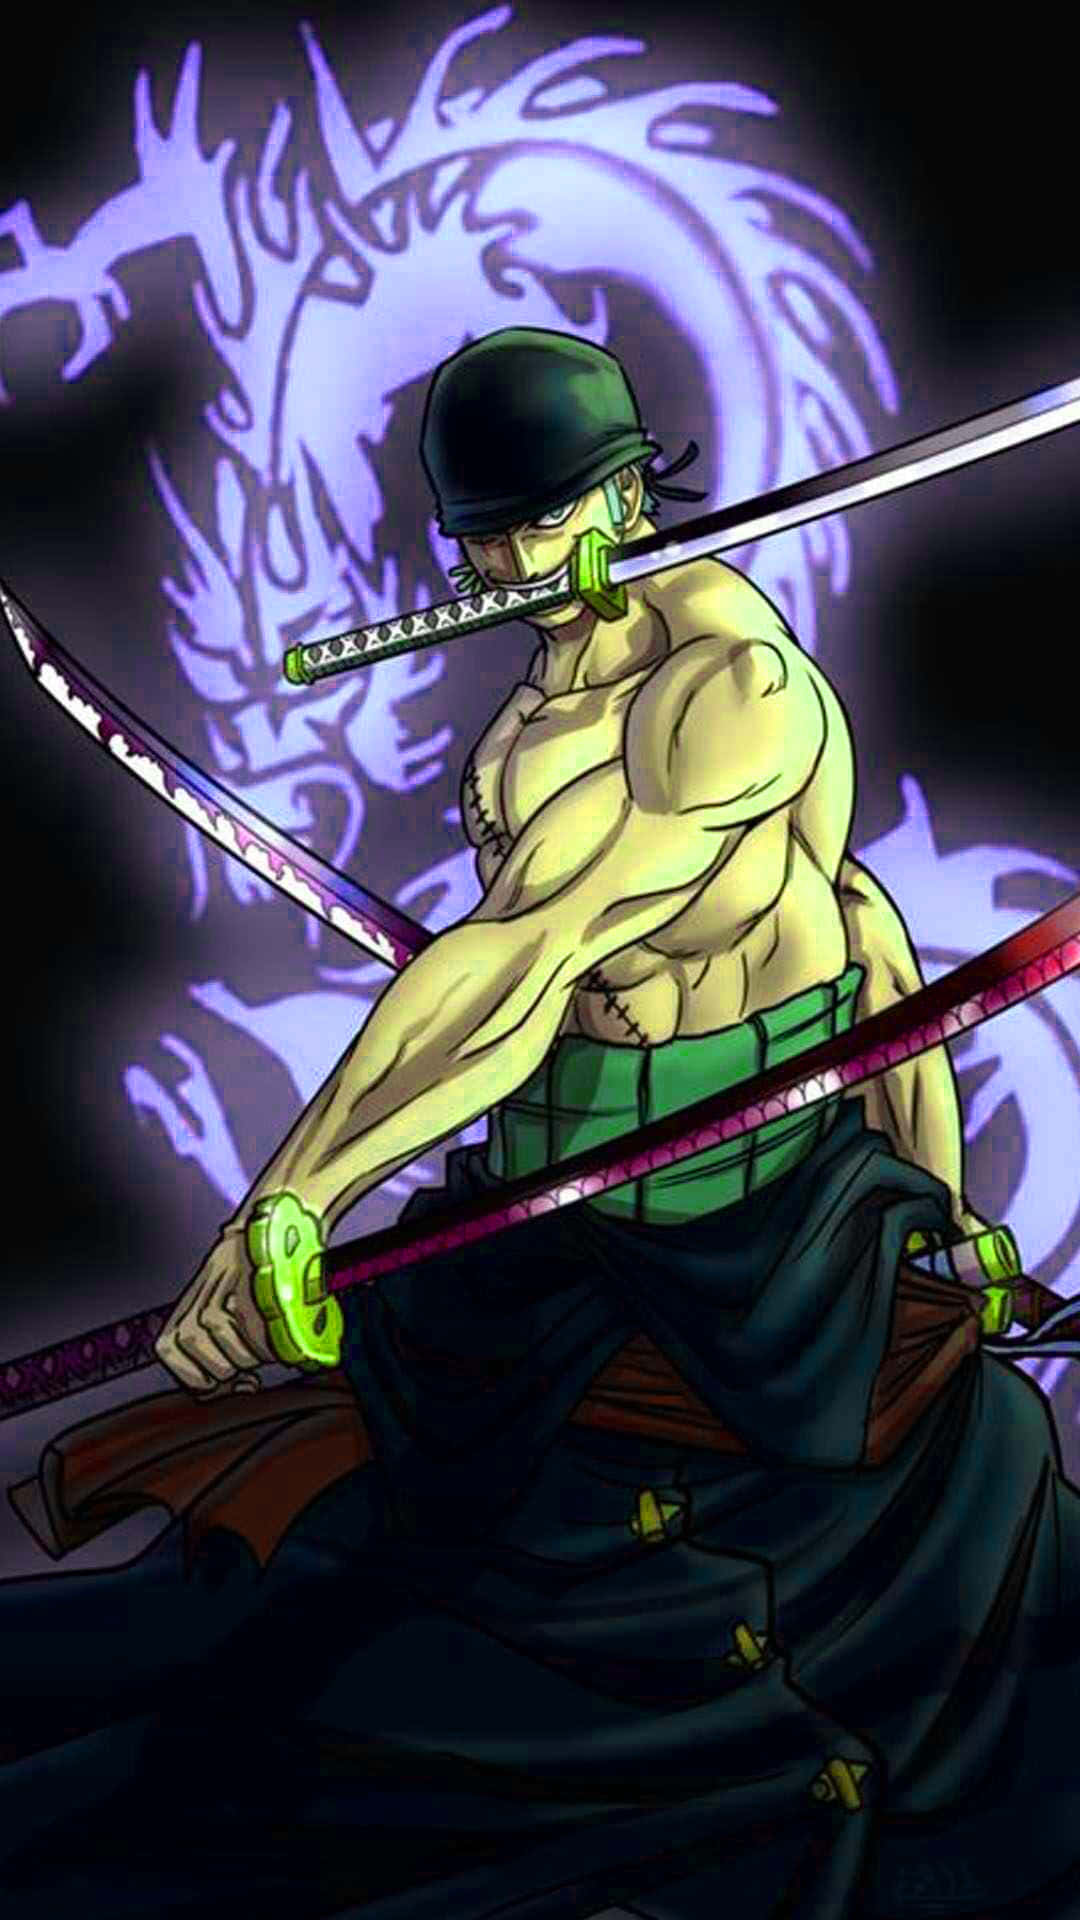 “A Swordsman of Unmatched Ability”